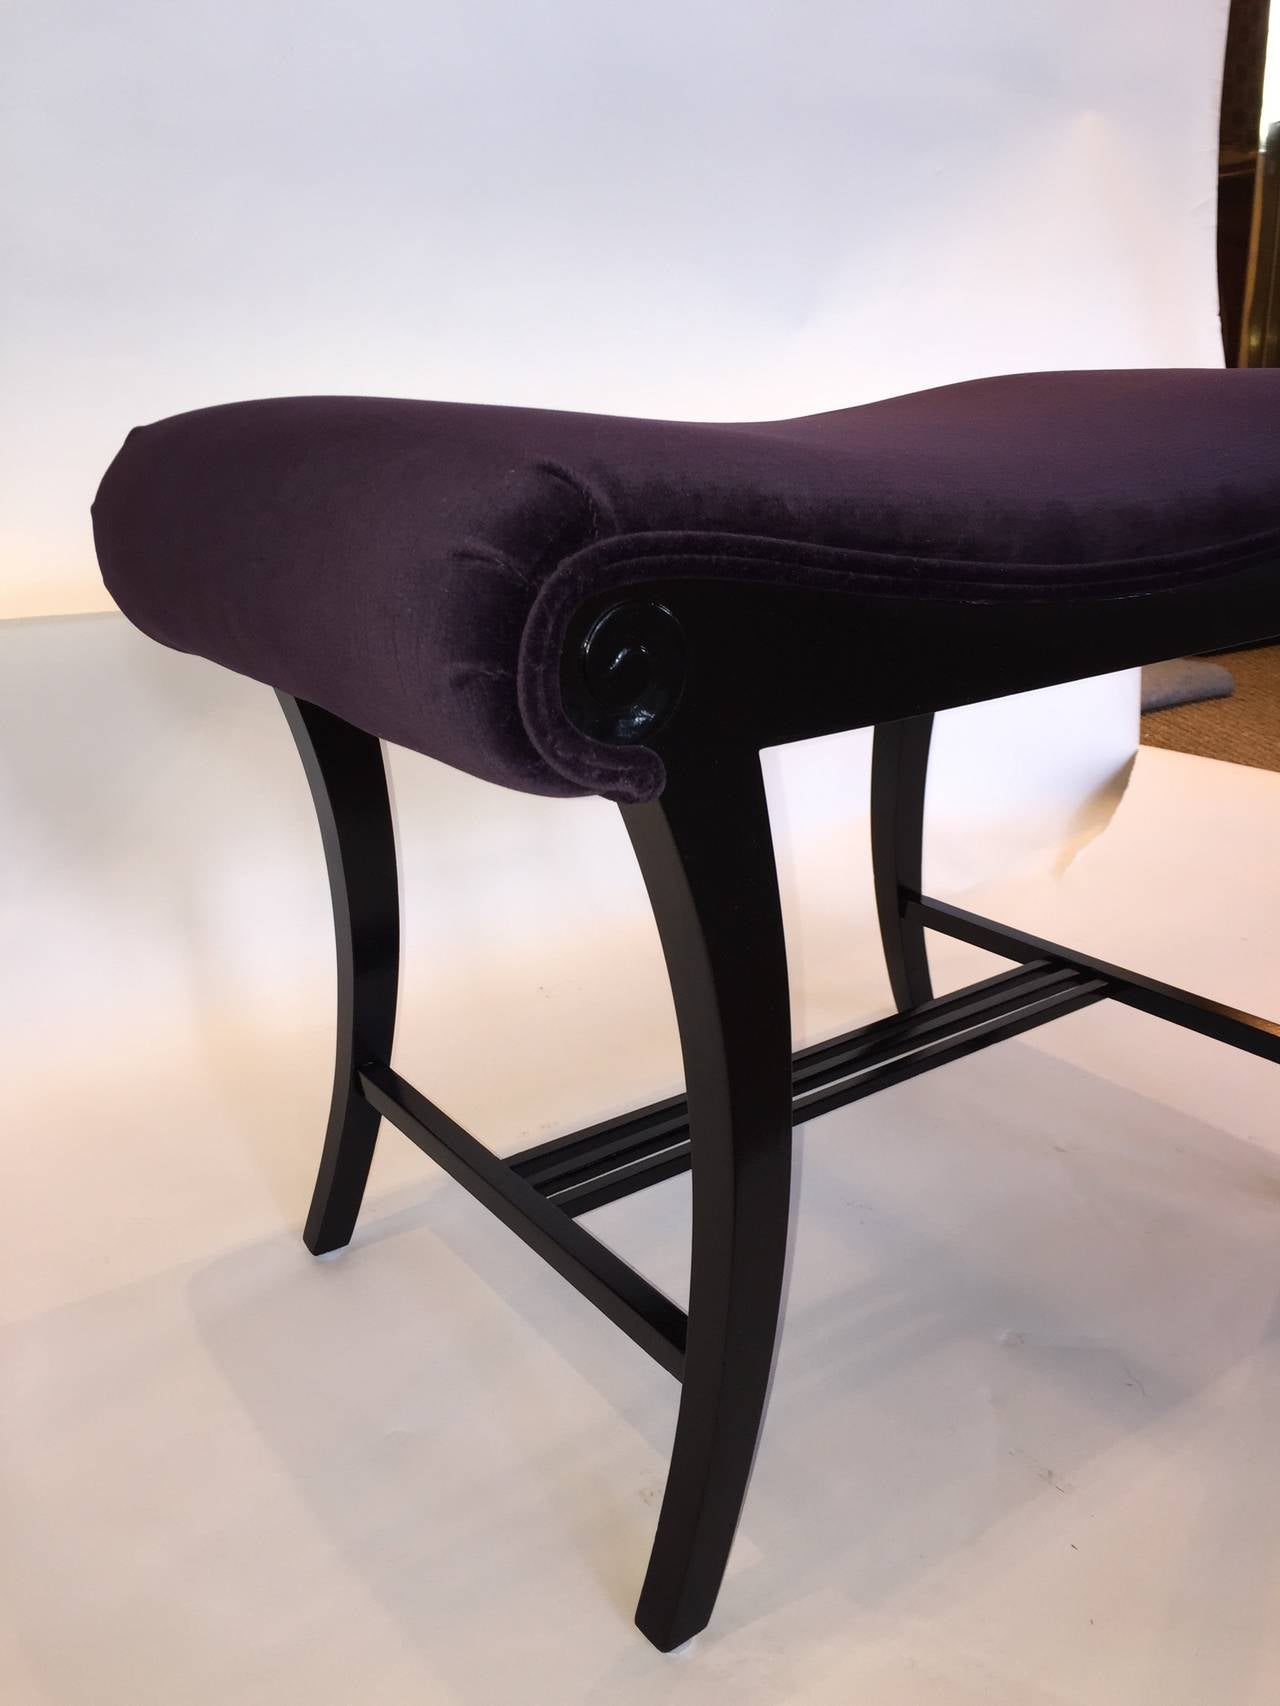 Newly upholstered in purple velvet, this beautiful Art Deco ebonized stool is perfect for any decor.